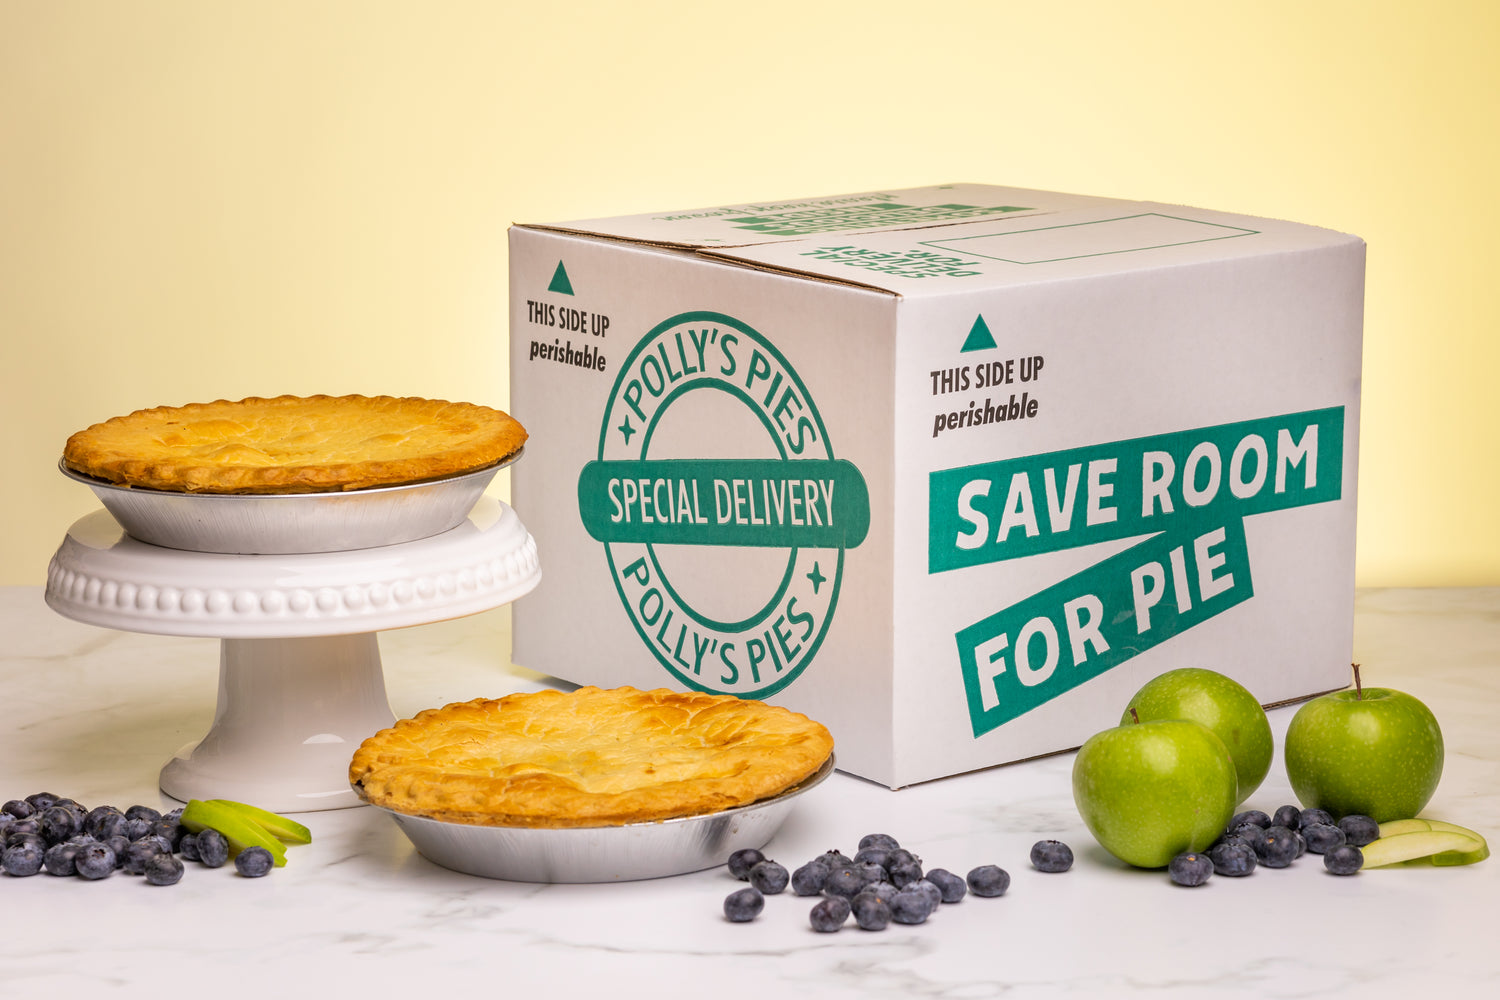 Two pies surrounded by sliced apples, whole apples, blueberries, and a Polly's Pies shipping box in front of a white marble and yellow background.